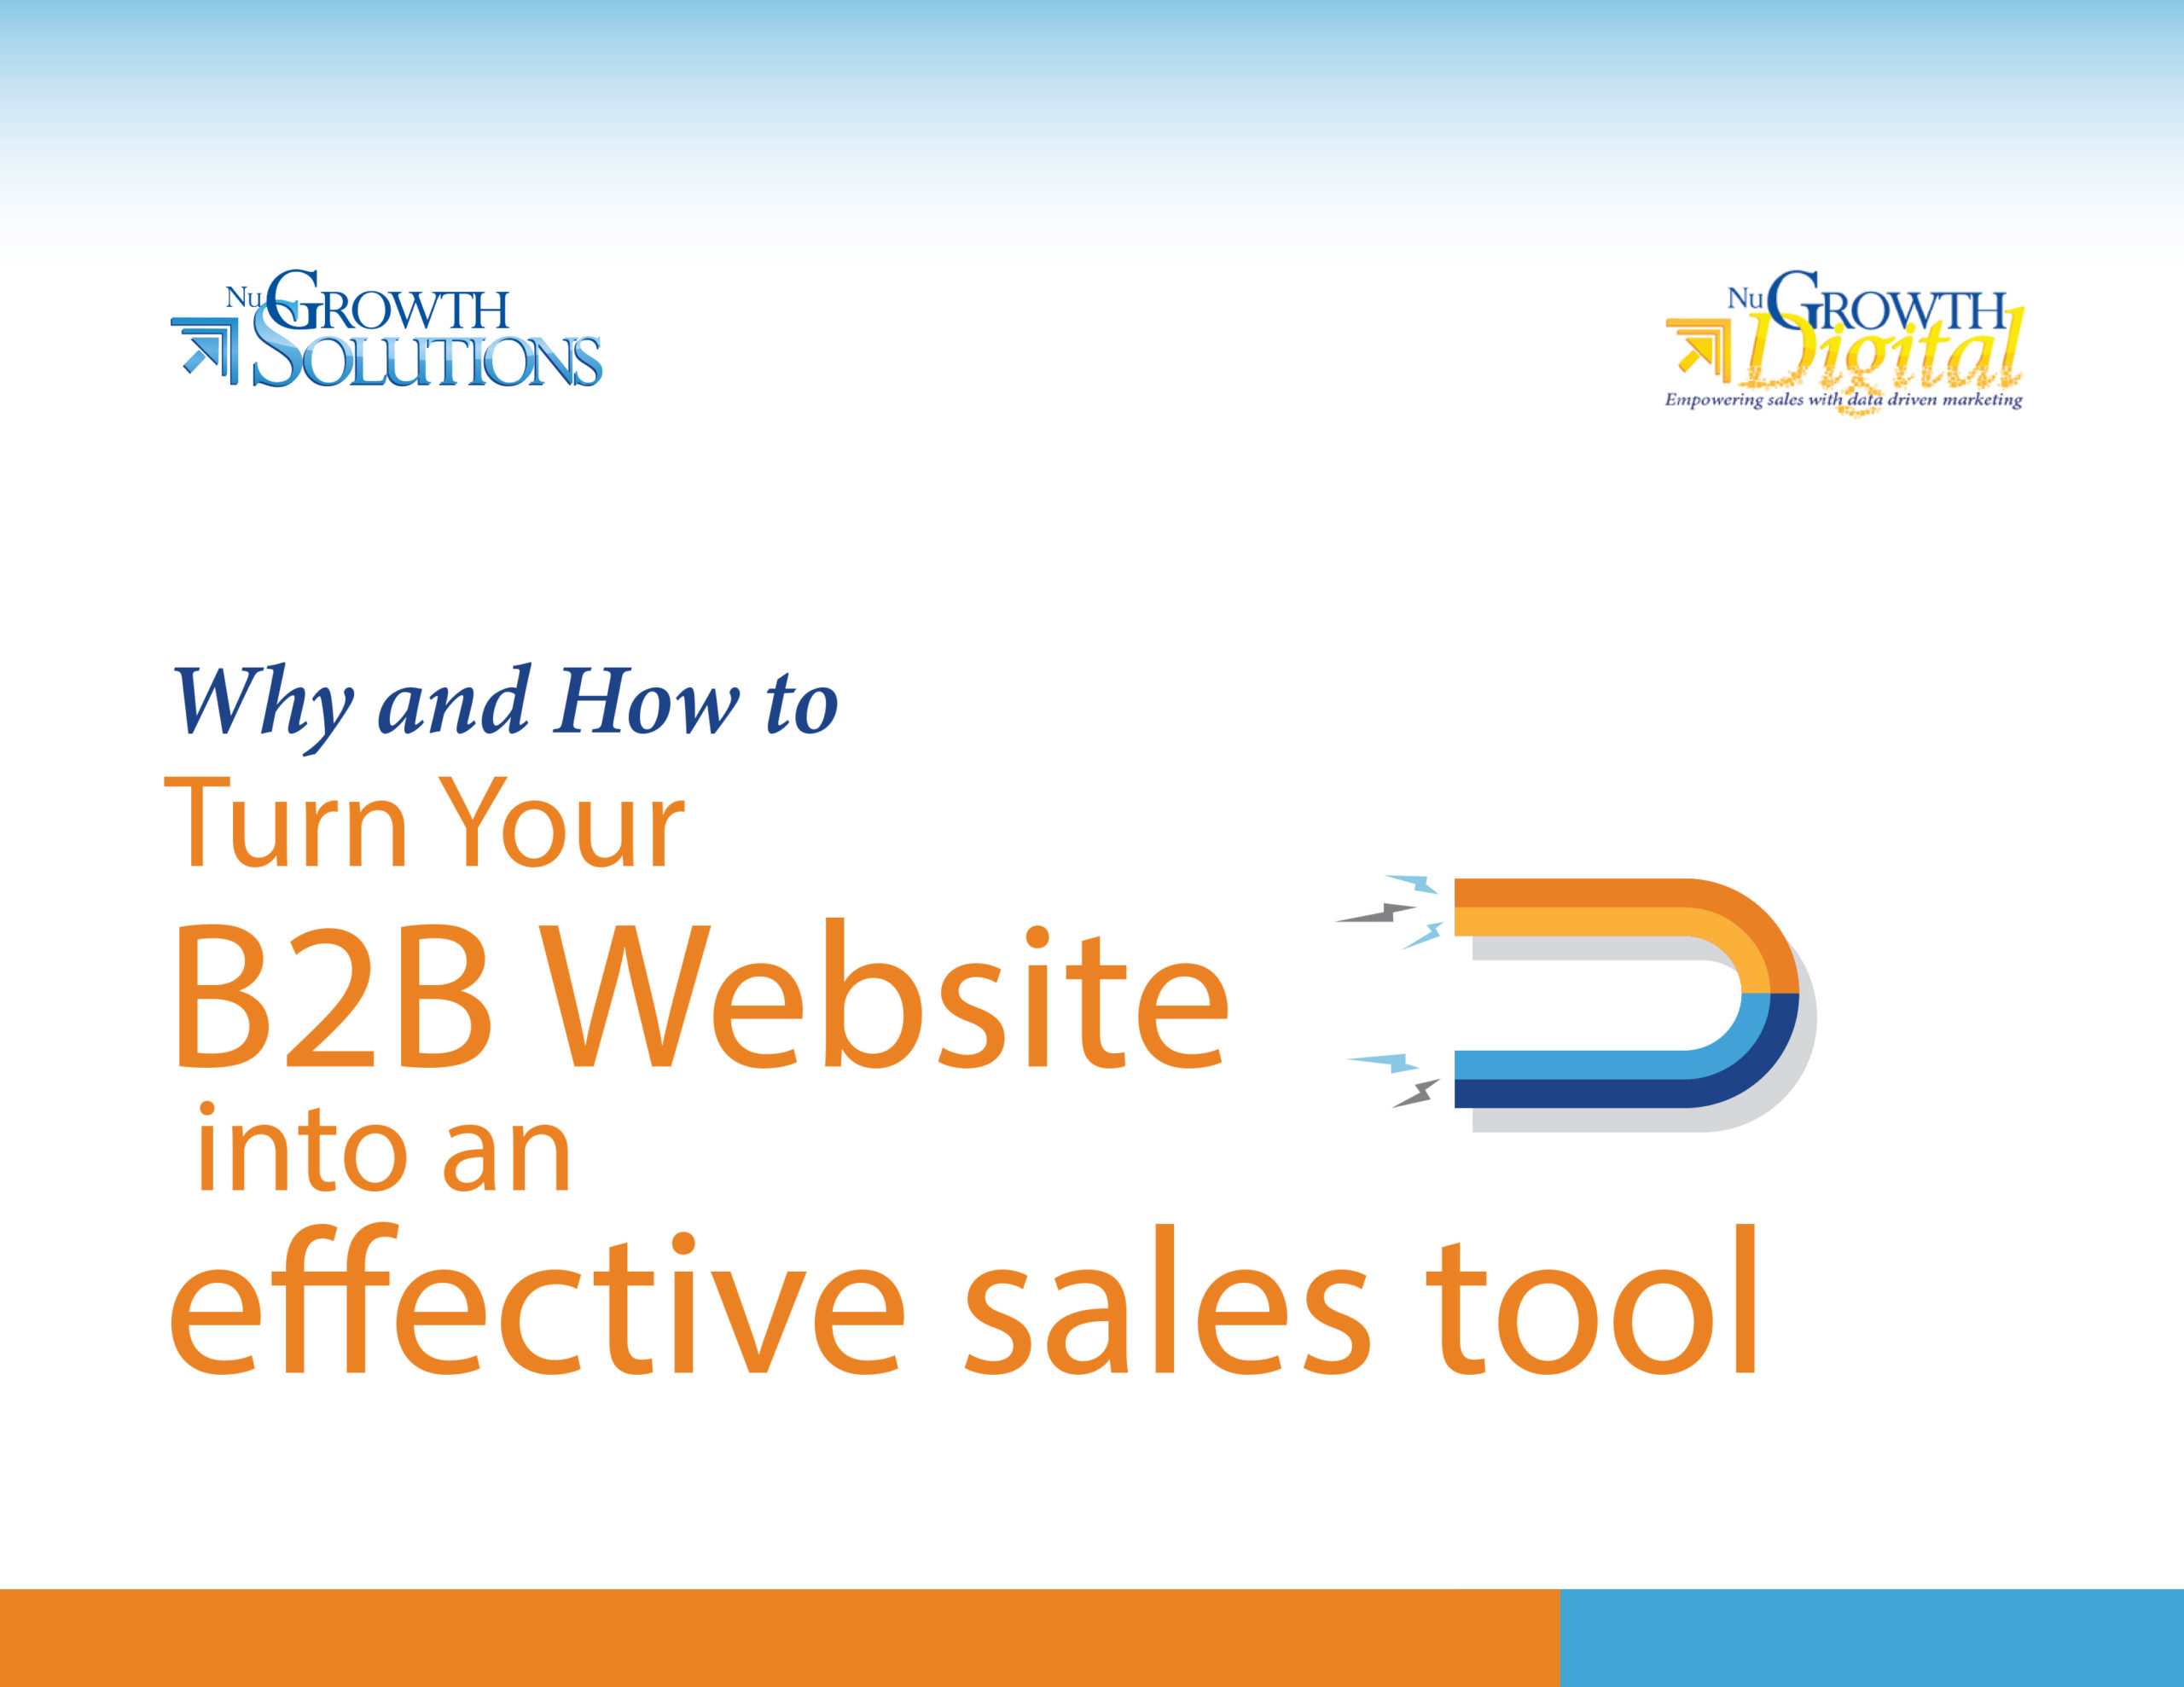 Why-and-How-to-Turn-Your-B2B-Website-into-Sales-Tool-1